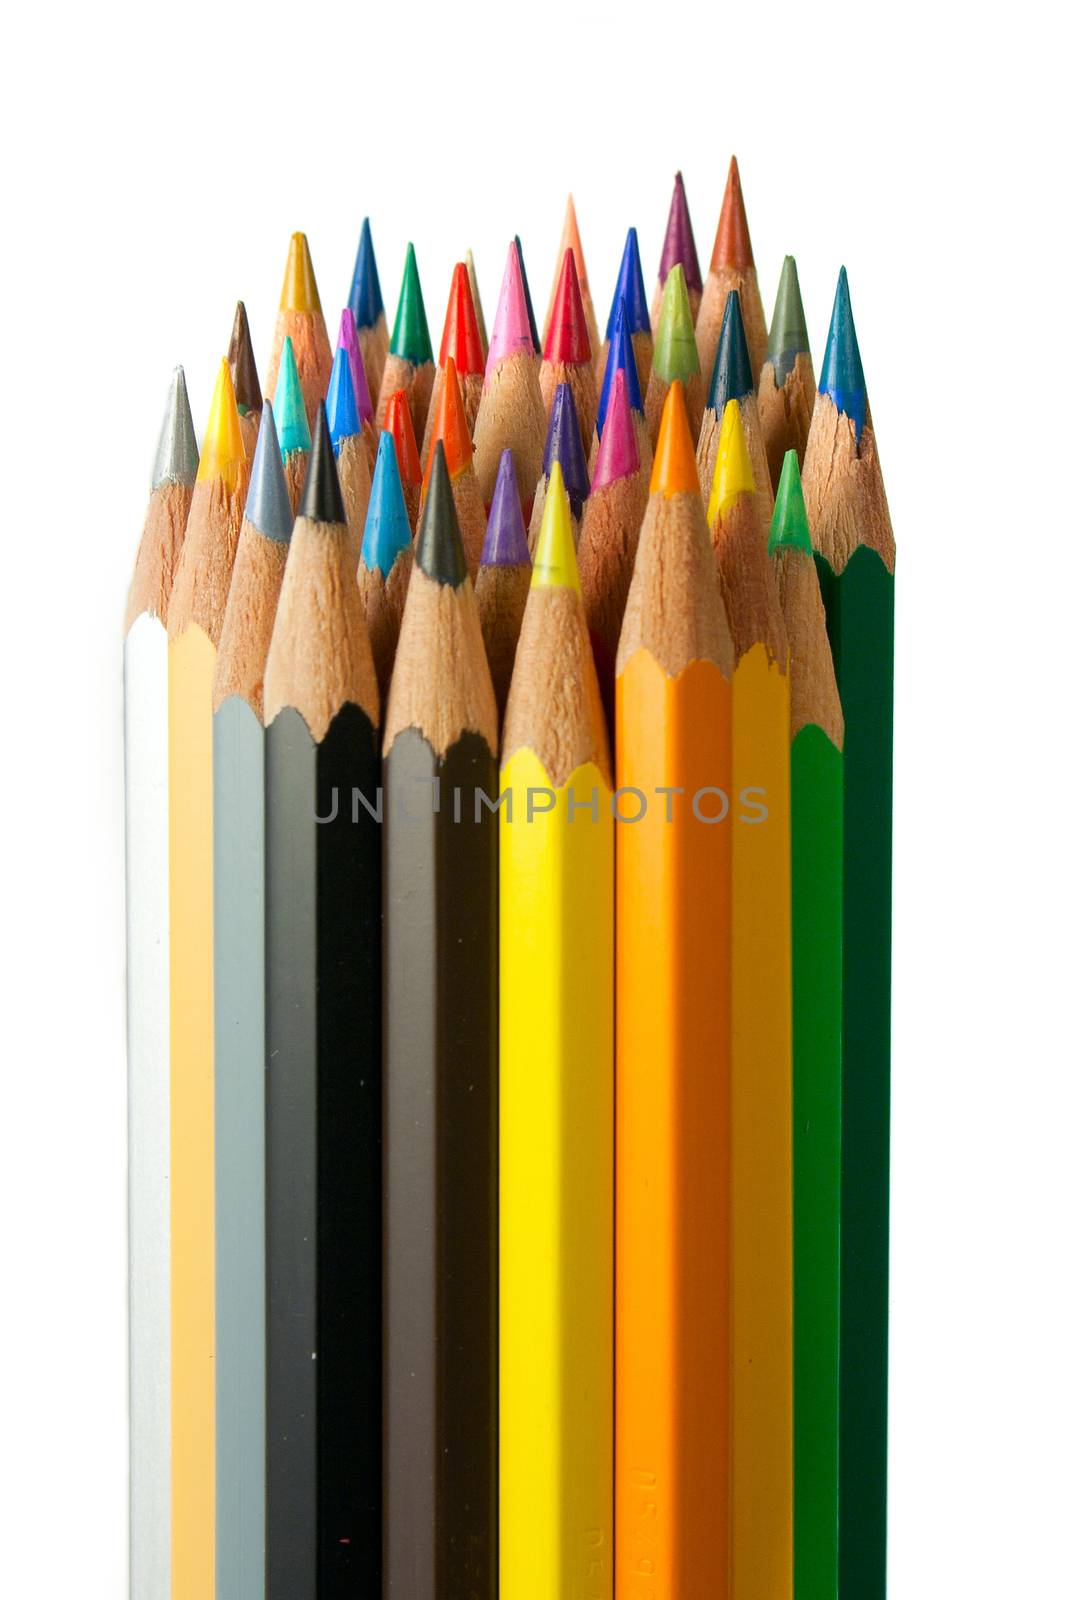 An assortment of color pencils on white background